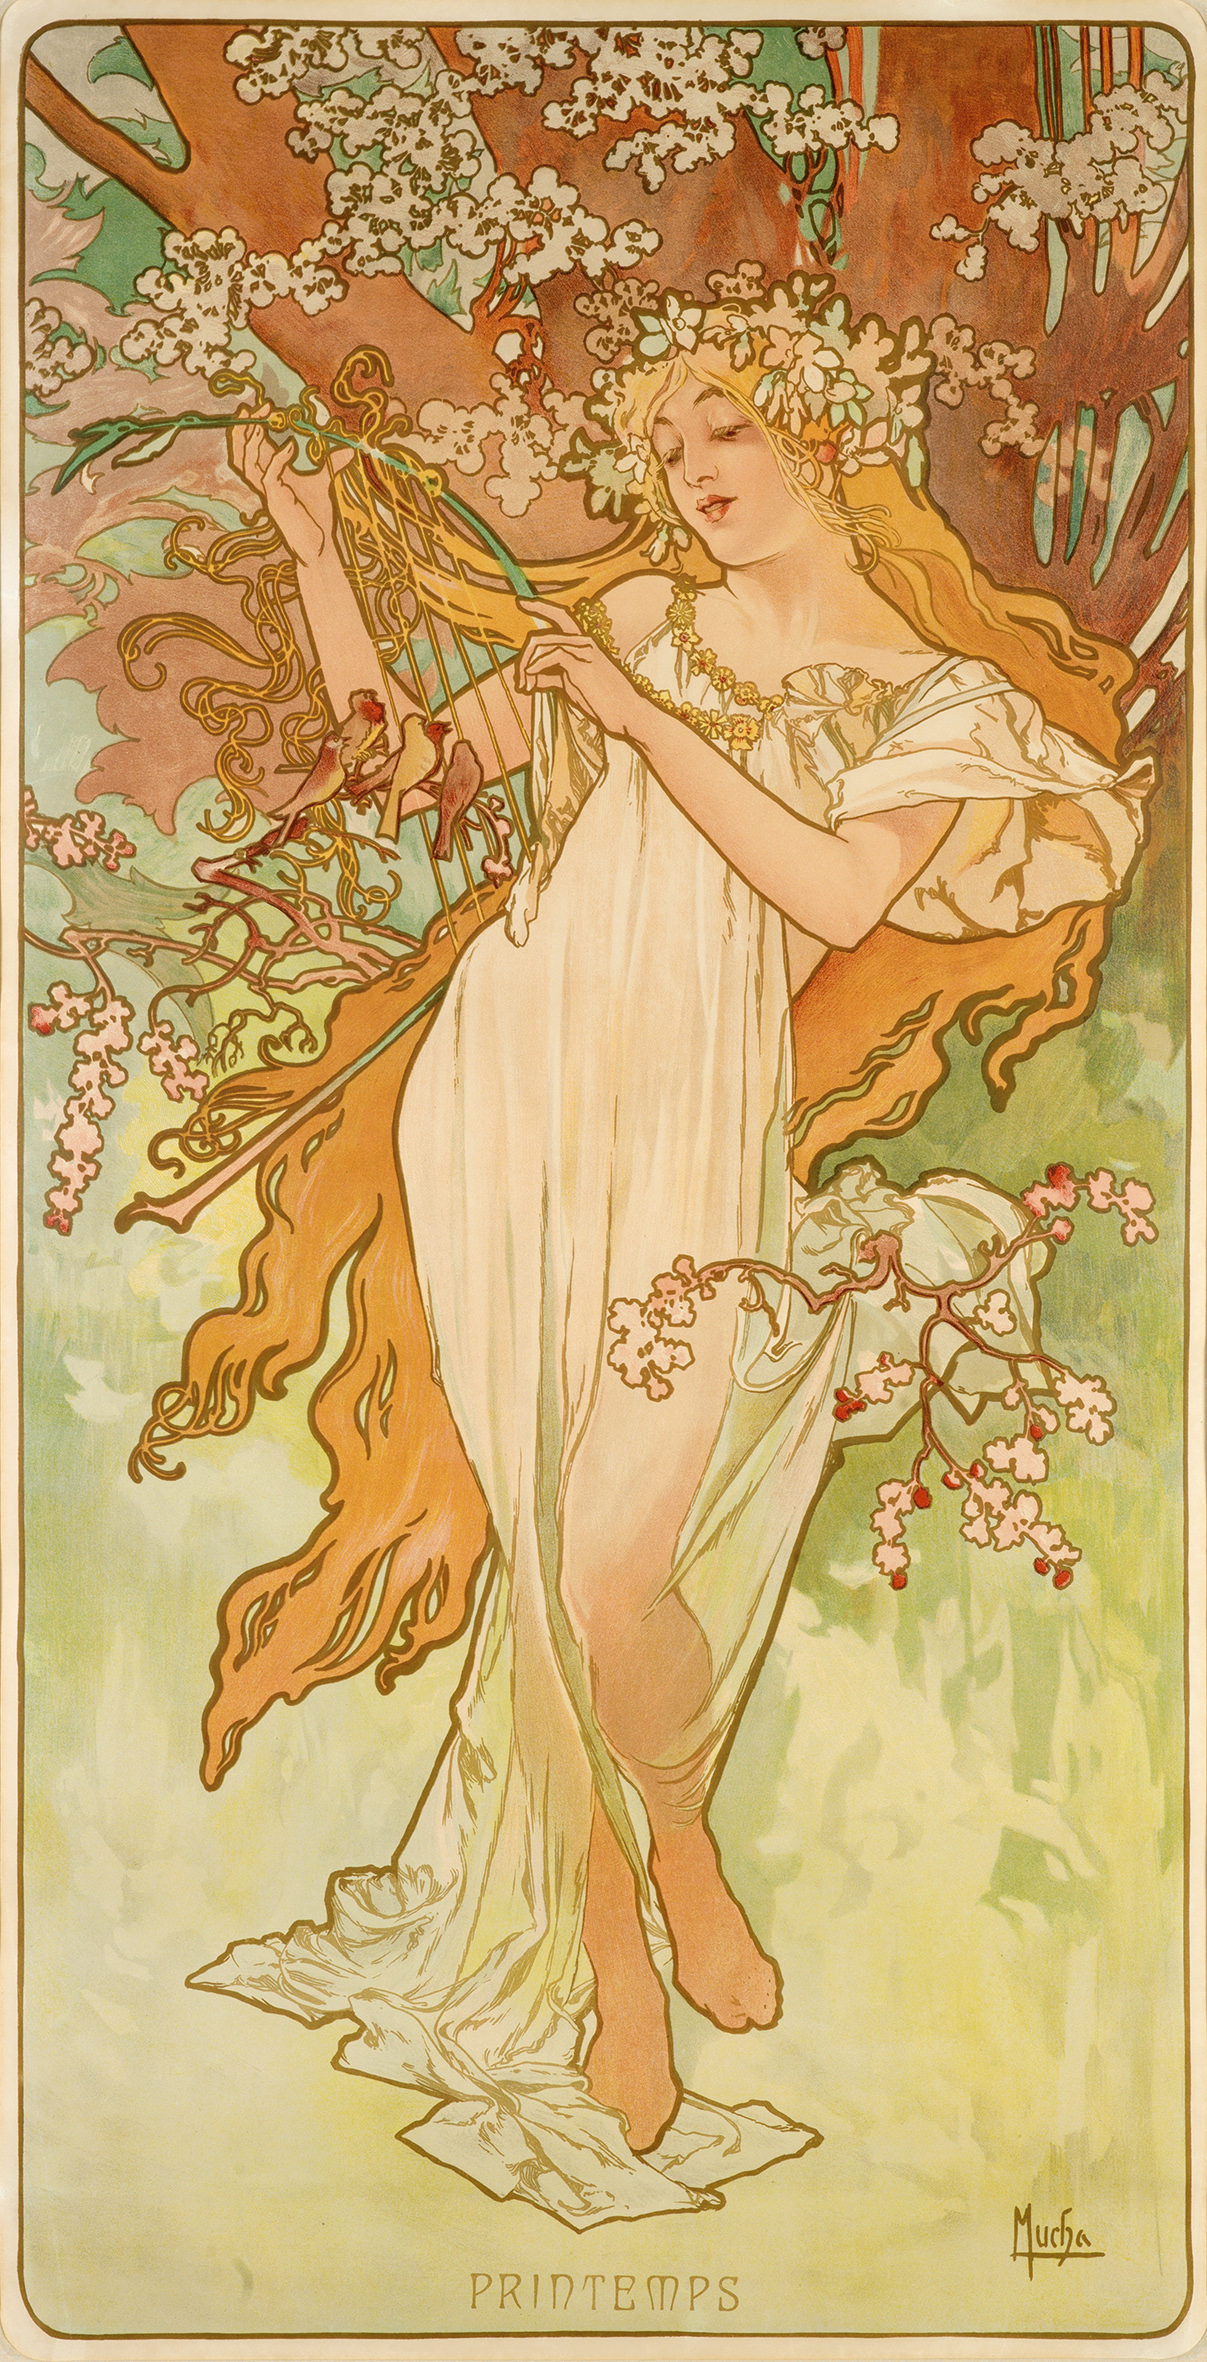 illustrational poster of a woman playing a harp and dancing amongst flowers